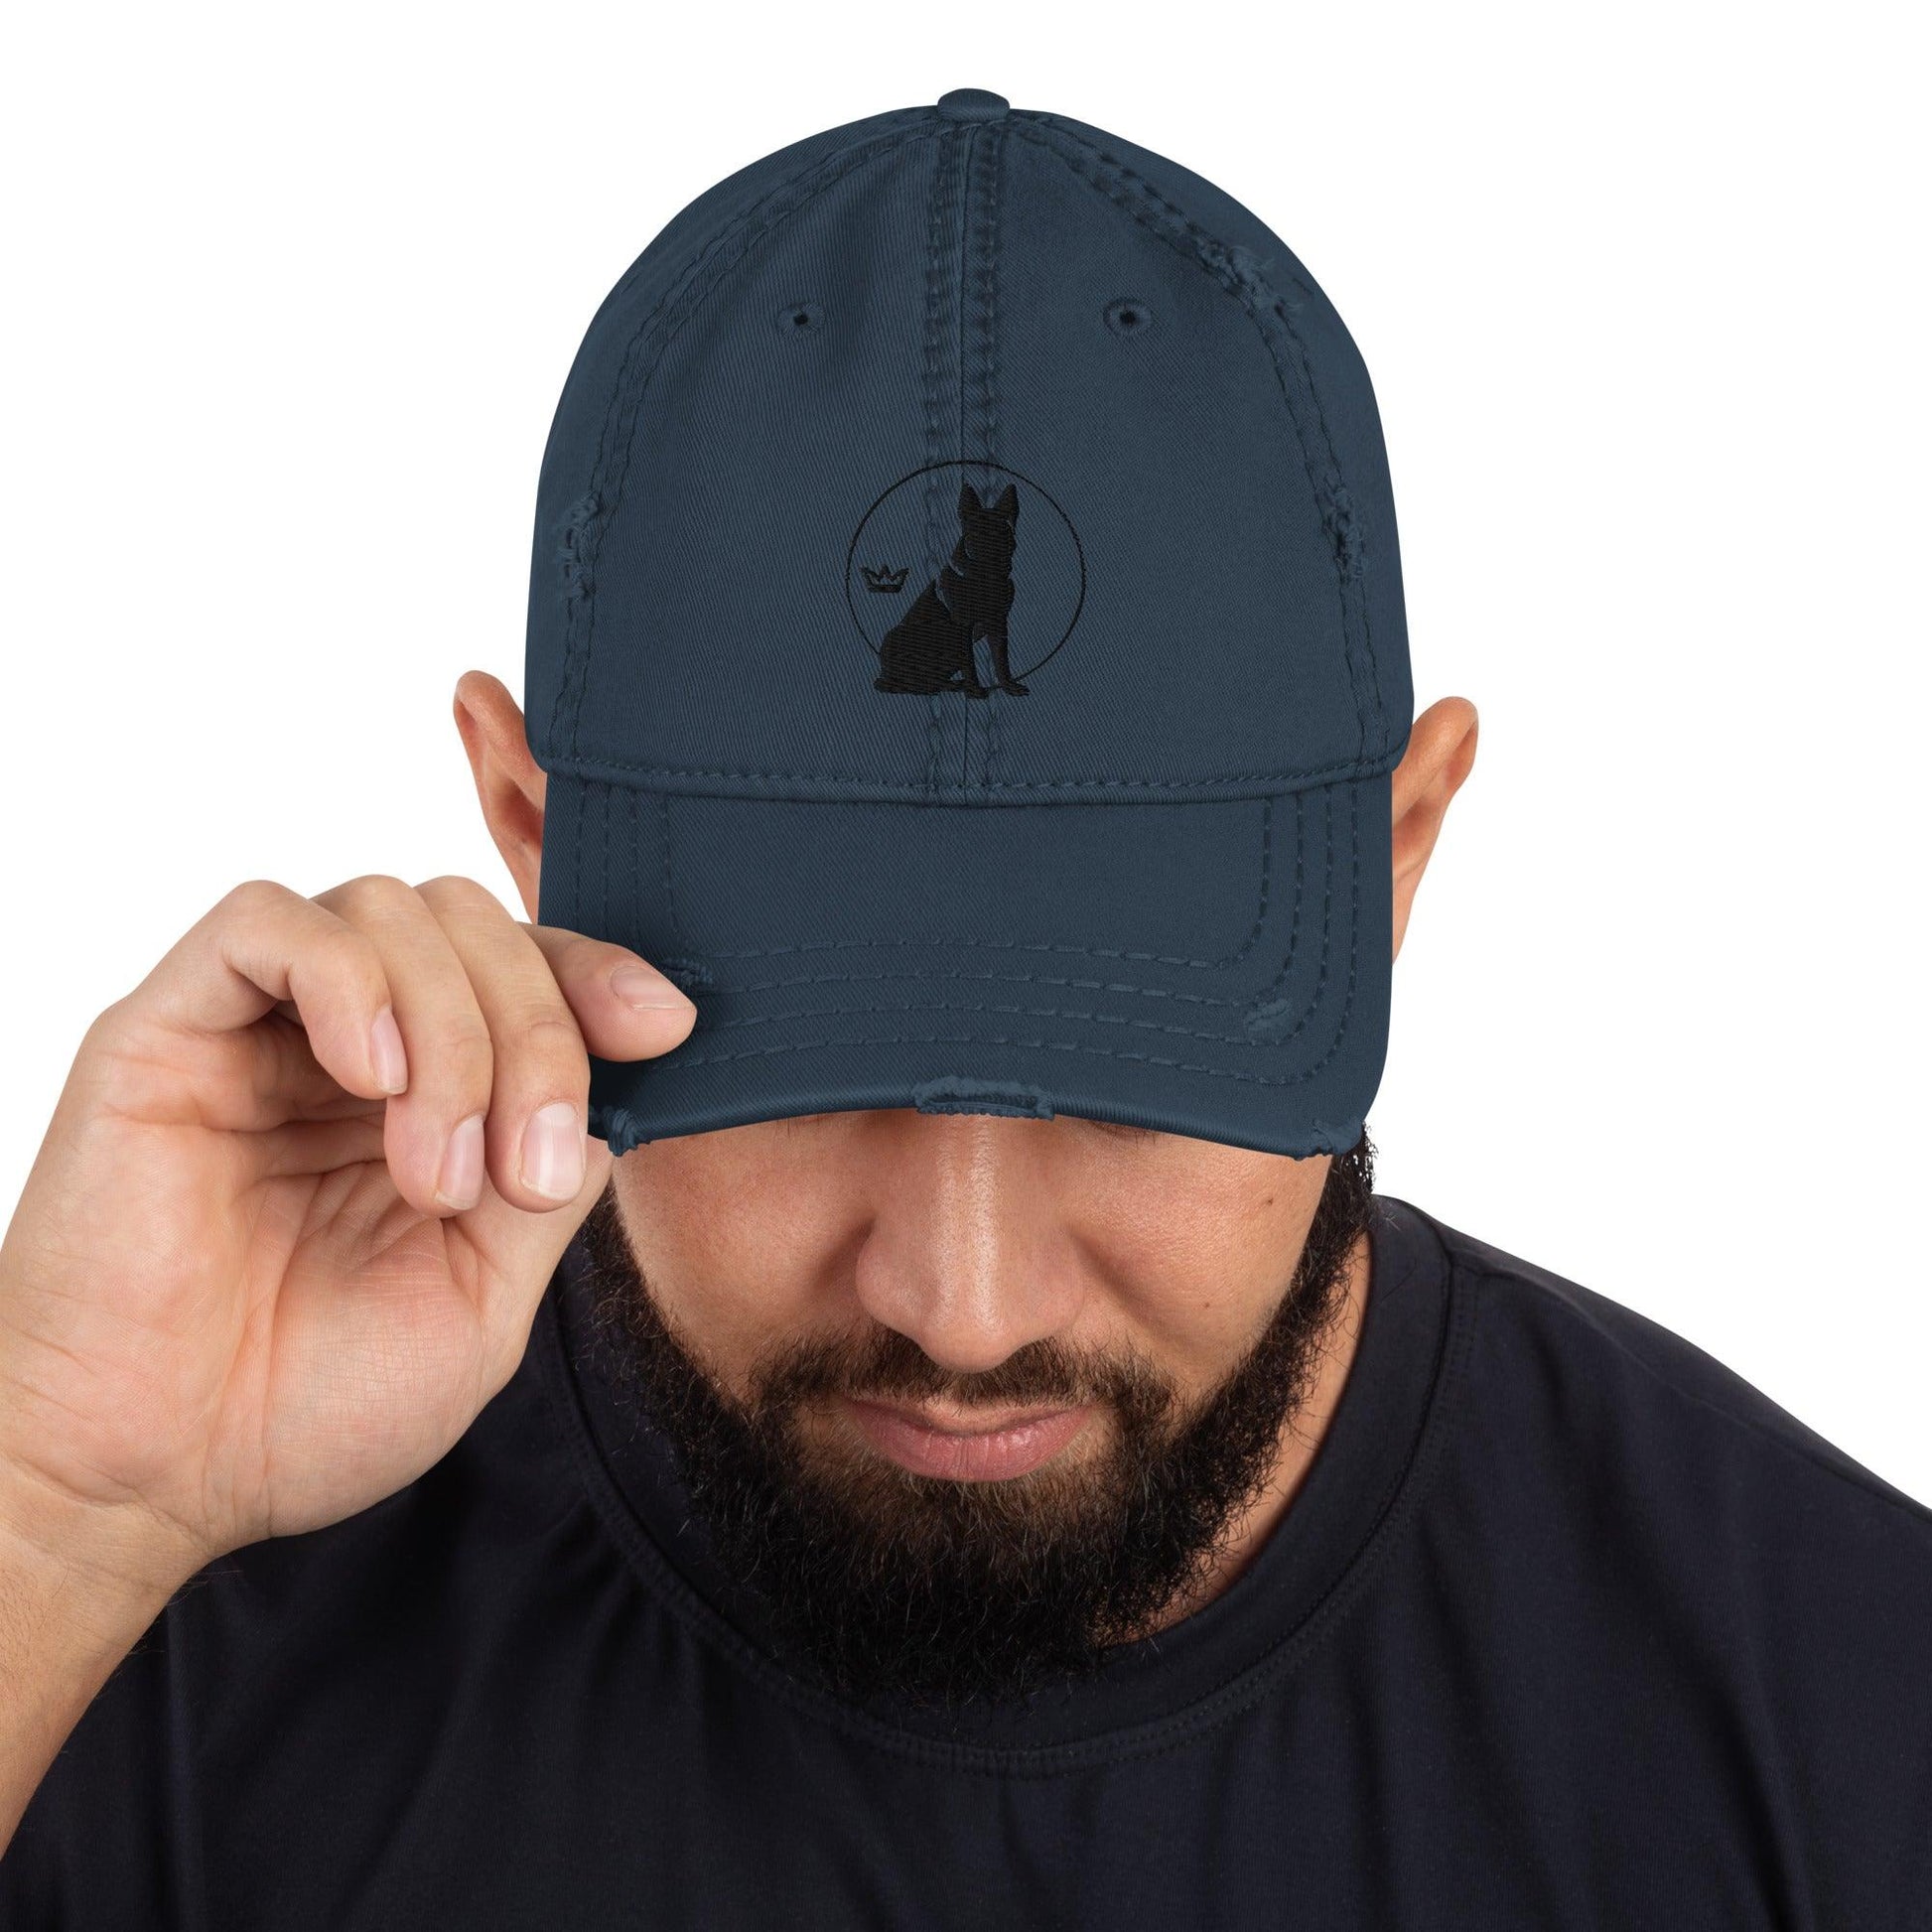 Distressed Dad Hat with Embroidered German Shepherd Logo - Hobbster